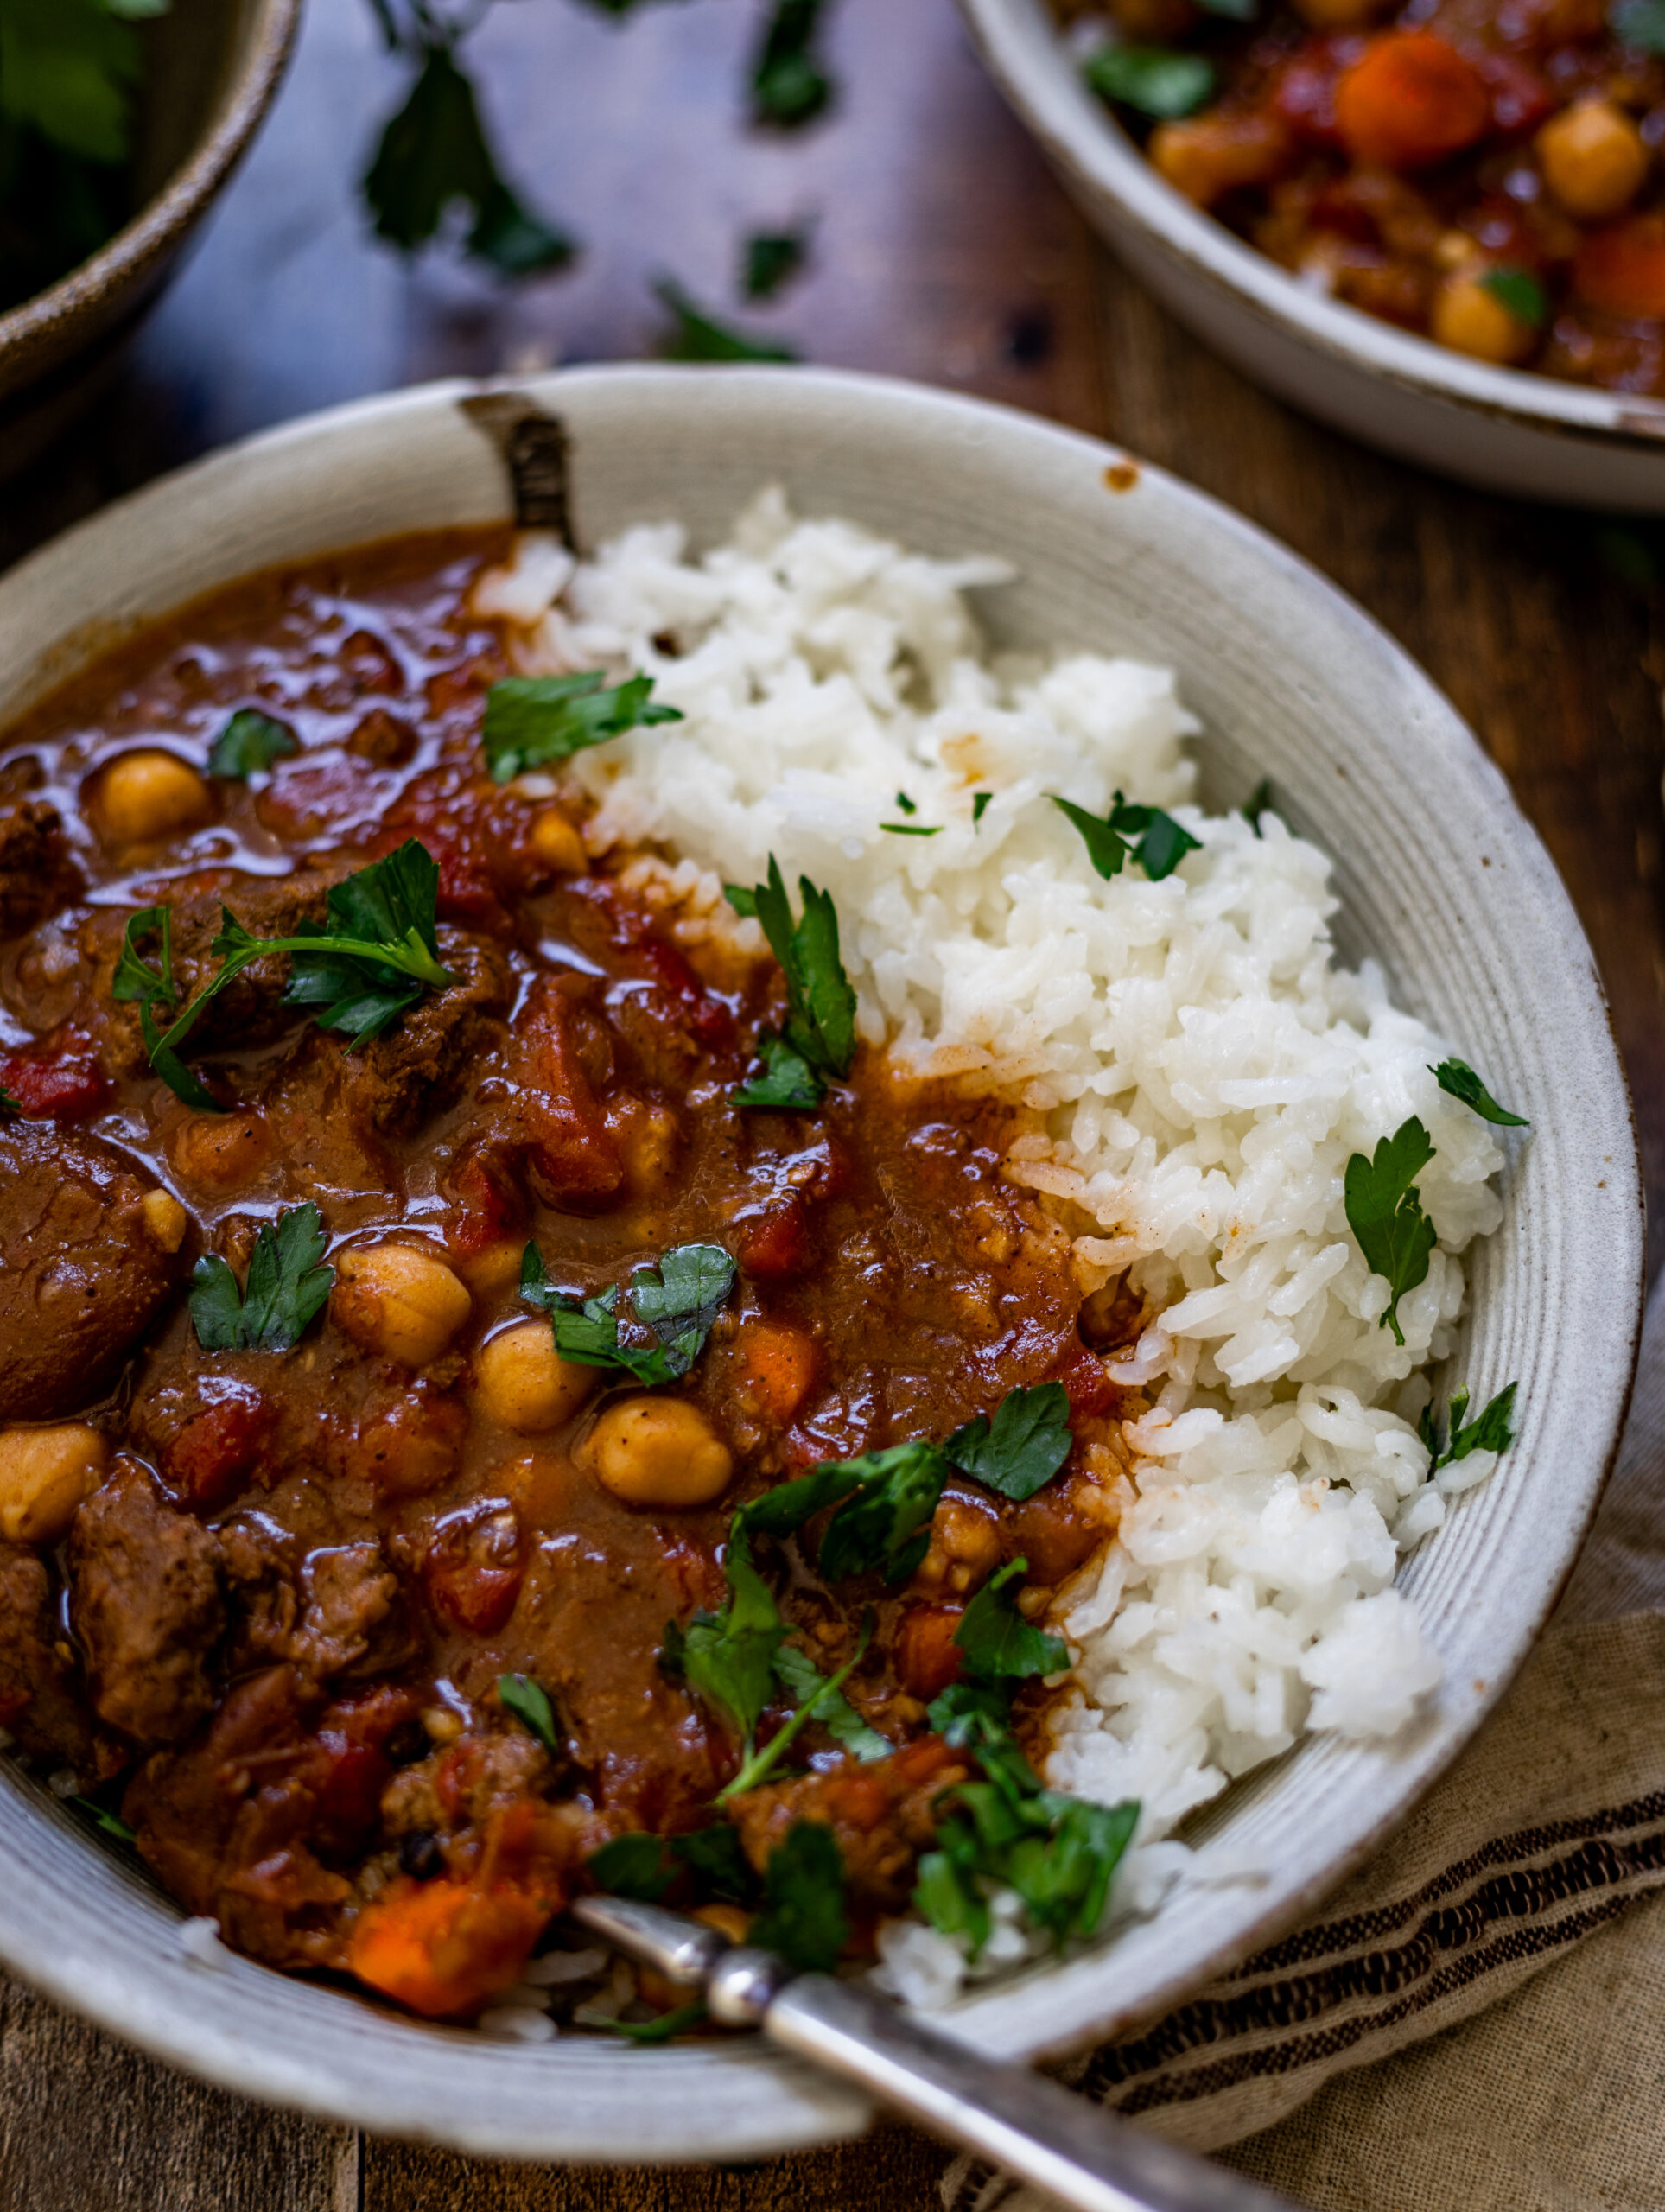 Moroccan lamb stew, an easy, one pot meal